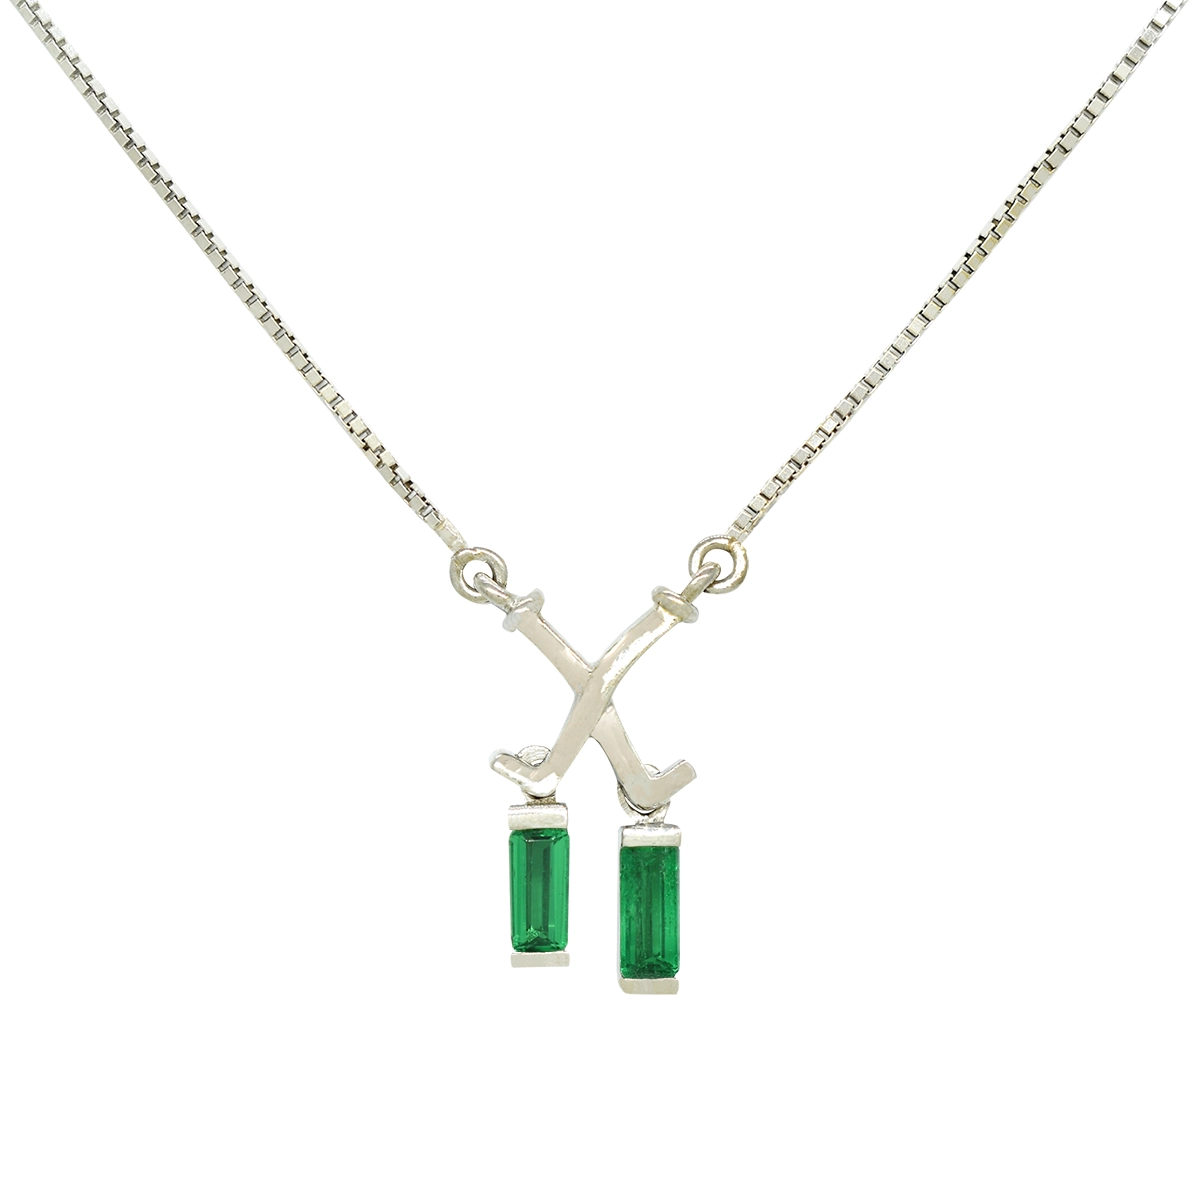 Emerald Necklace in 18K White Gold with 2 Baguette Cut Natural Colombian Emeralds